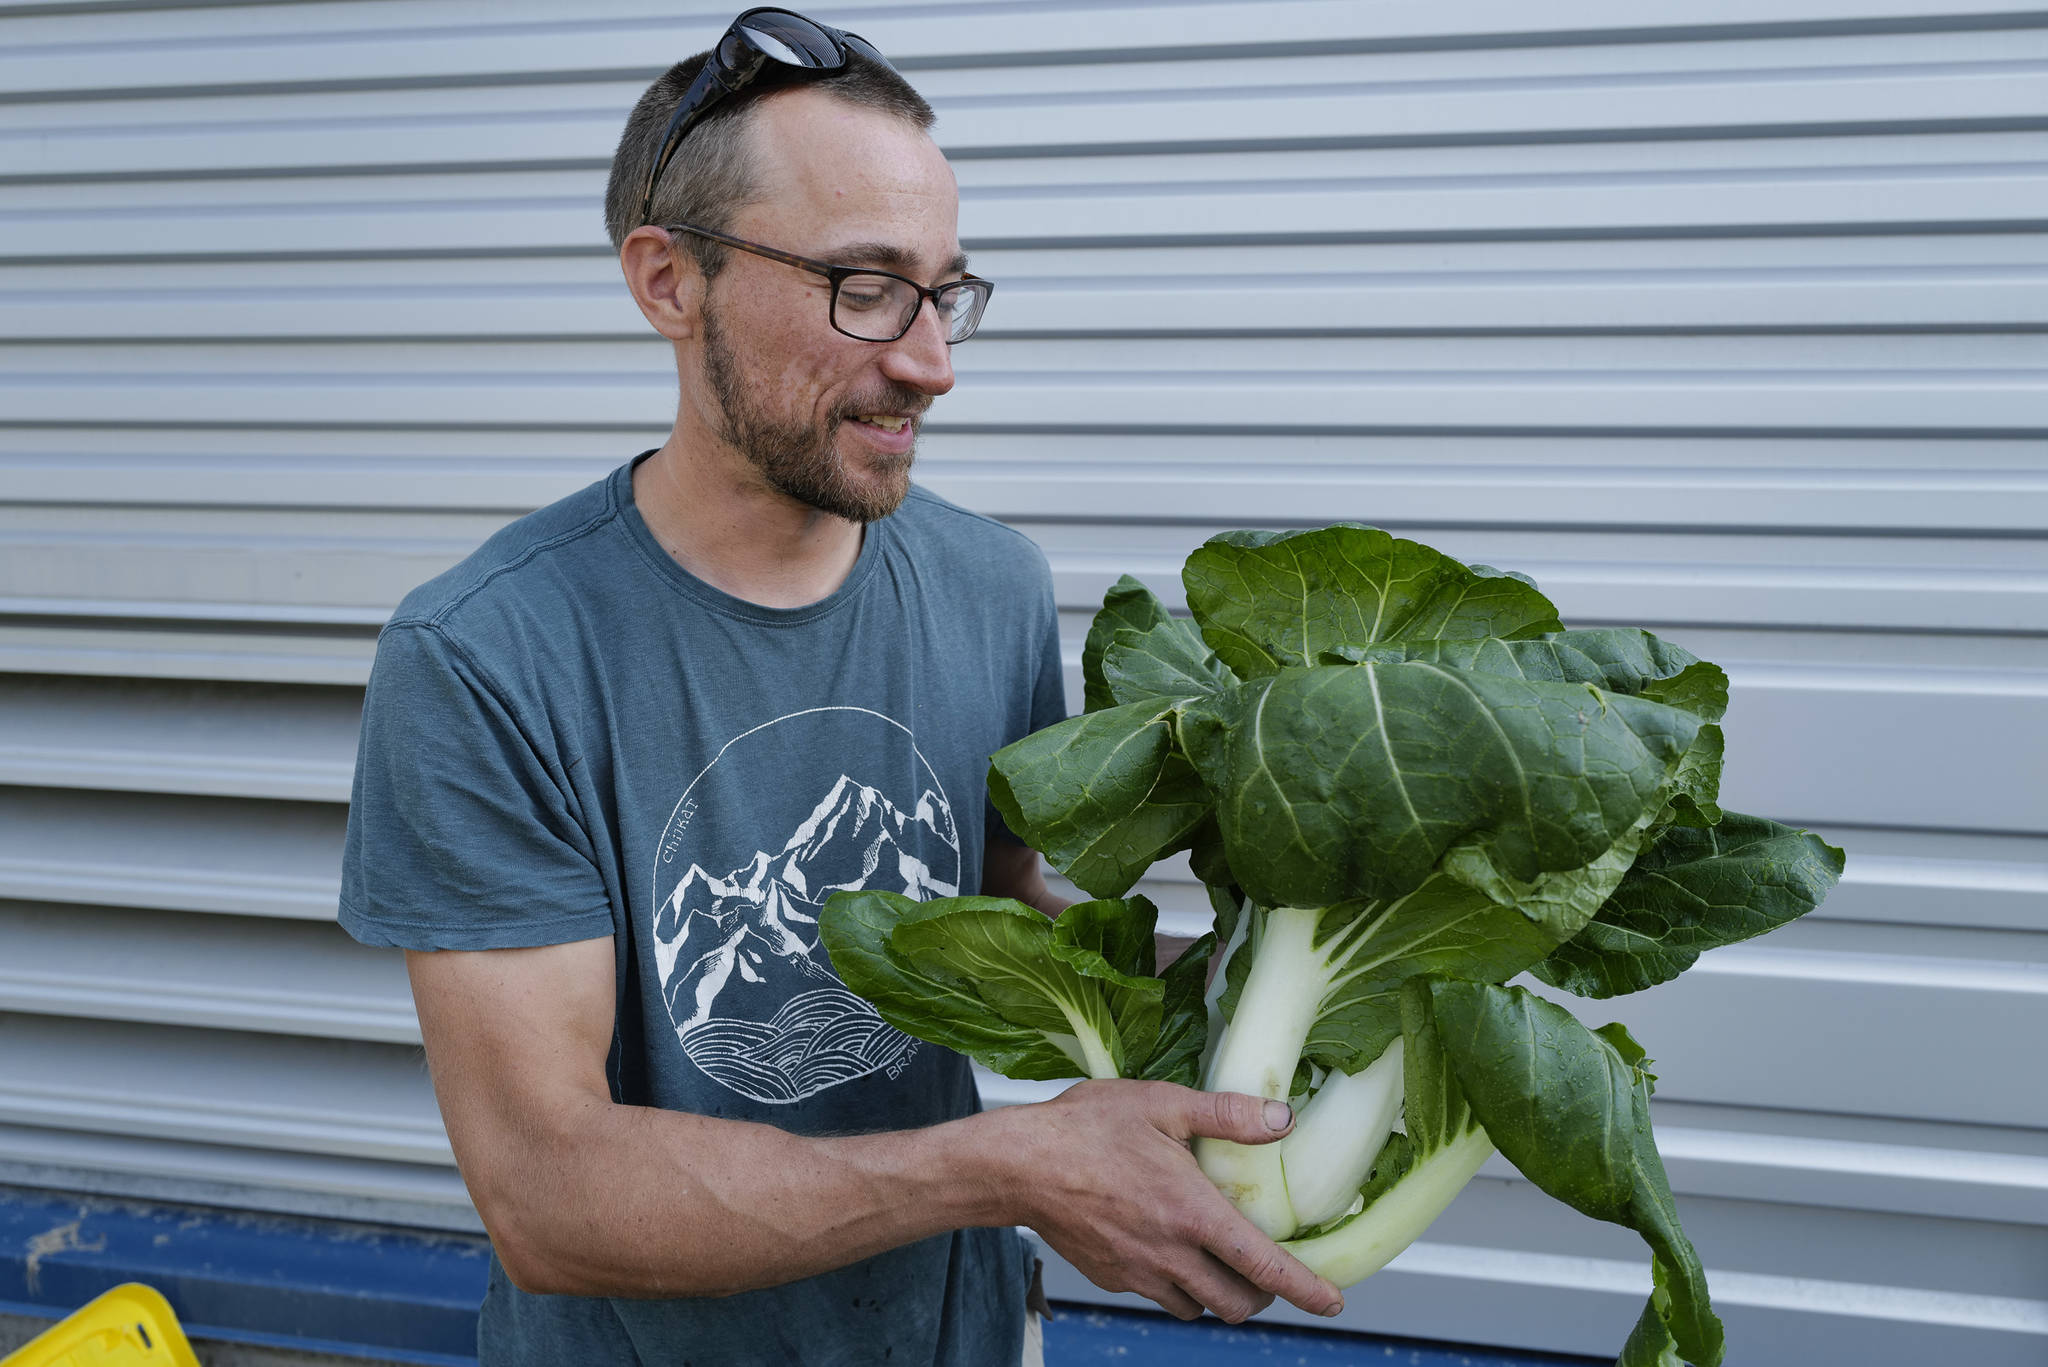 Master gardener Joel Bos holds bok choy grown with support from the Farm to School program at Harborview Elementary School on Wednesday, June 26, 2019. (Michael Penn | Juneau Empire)